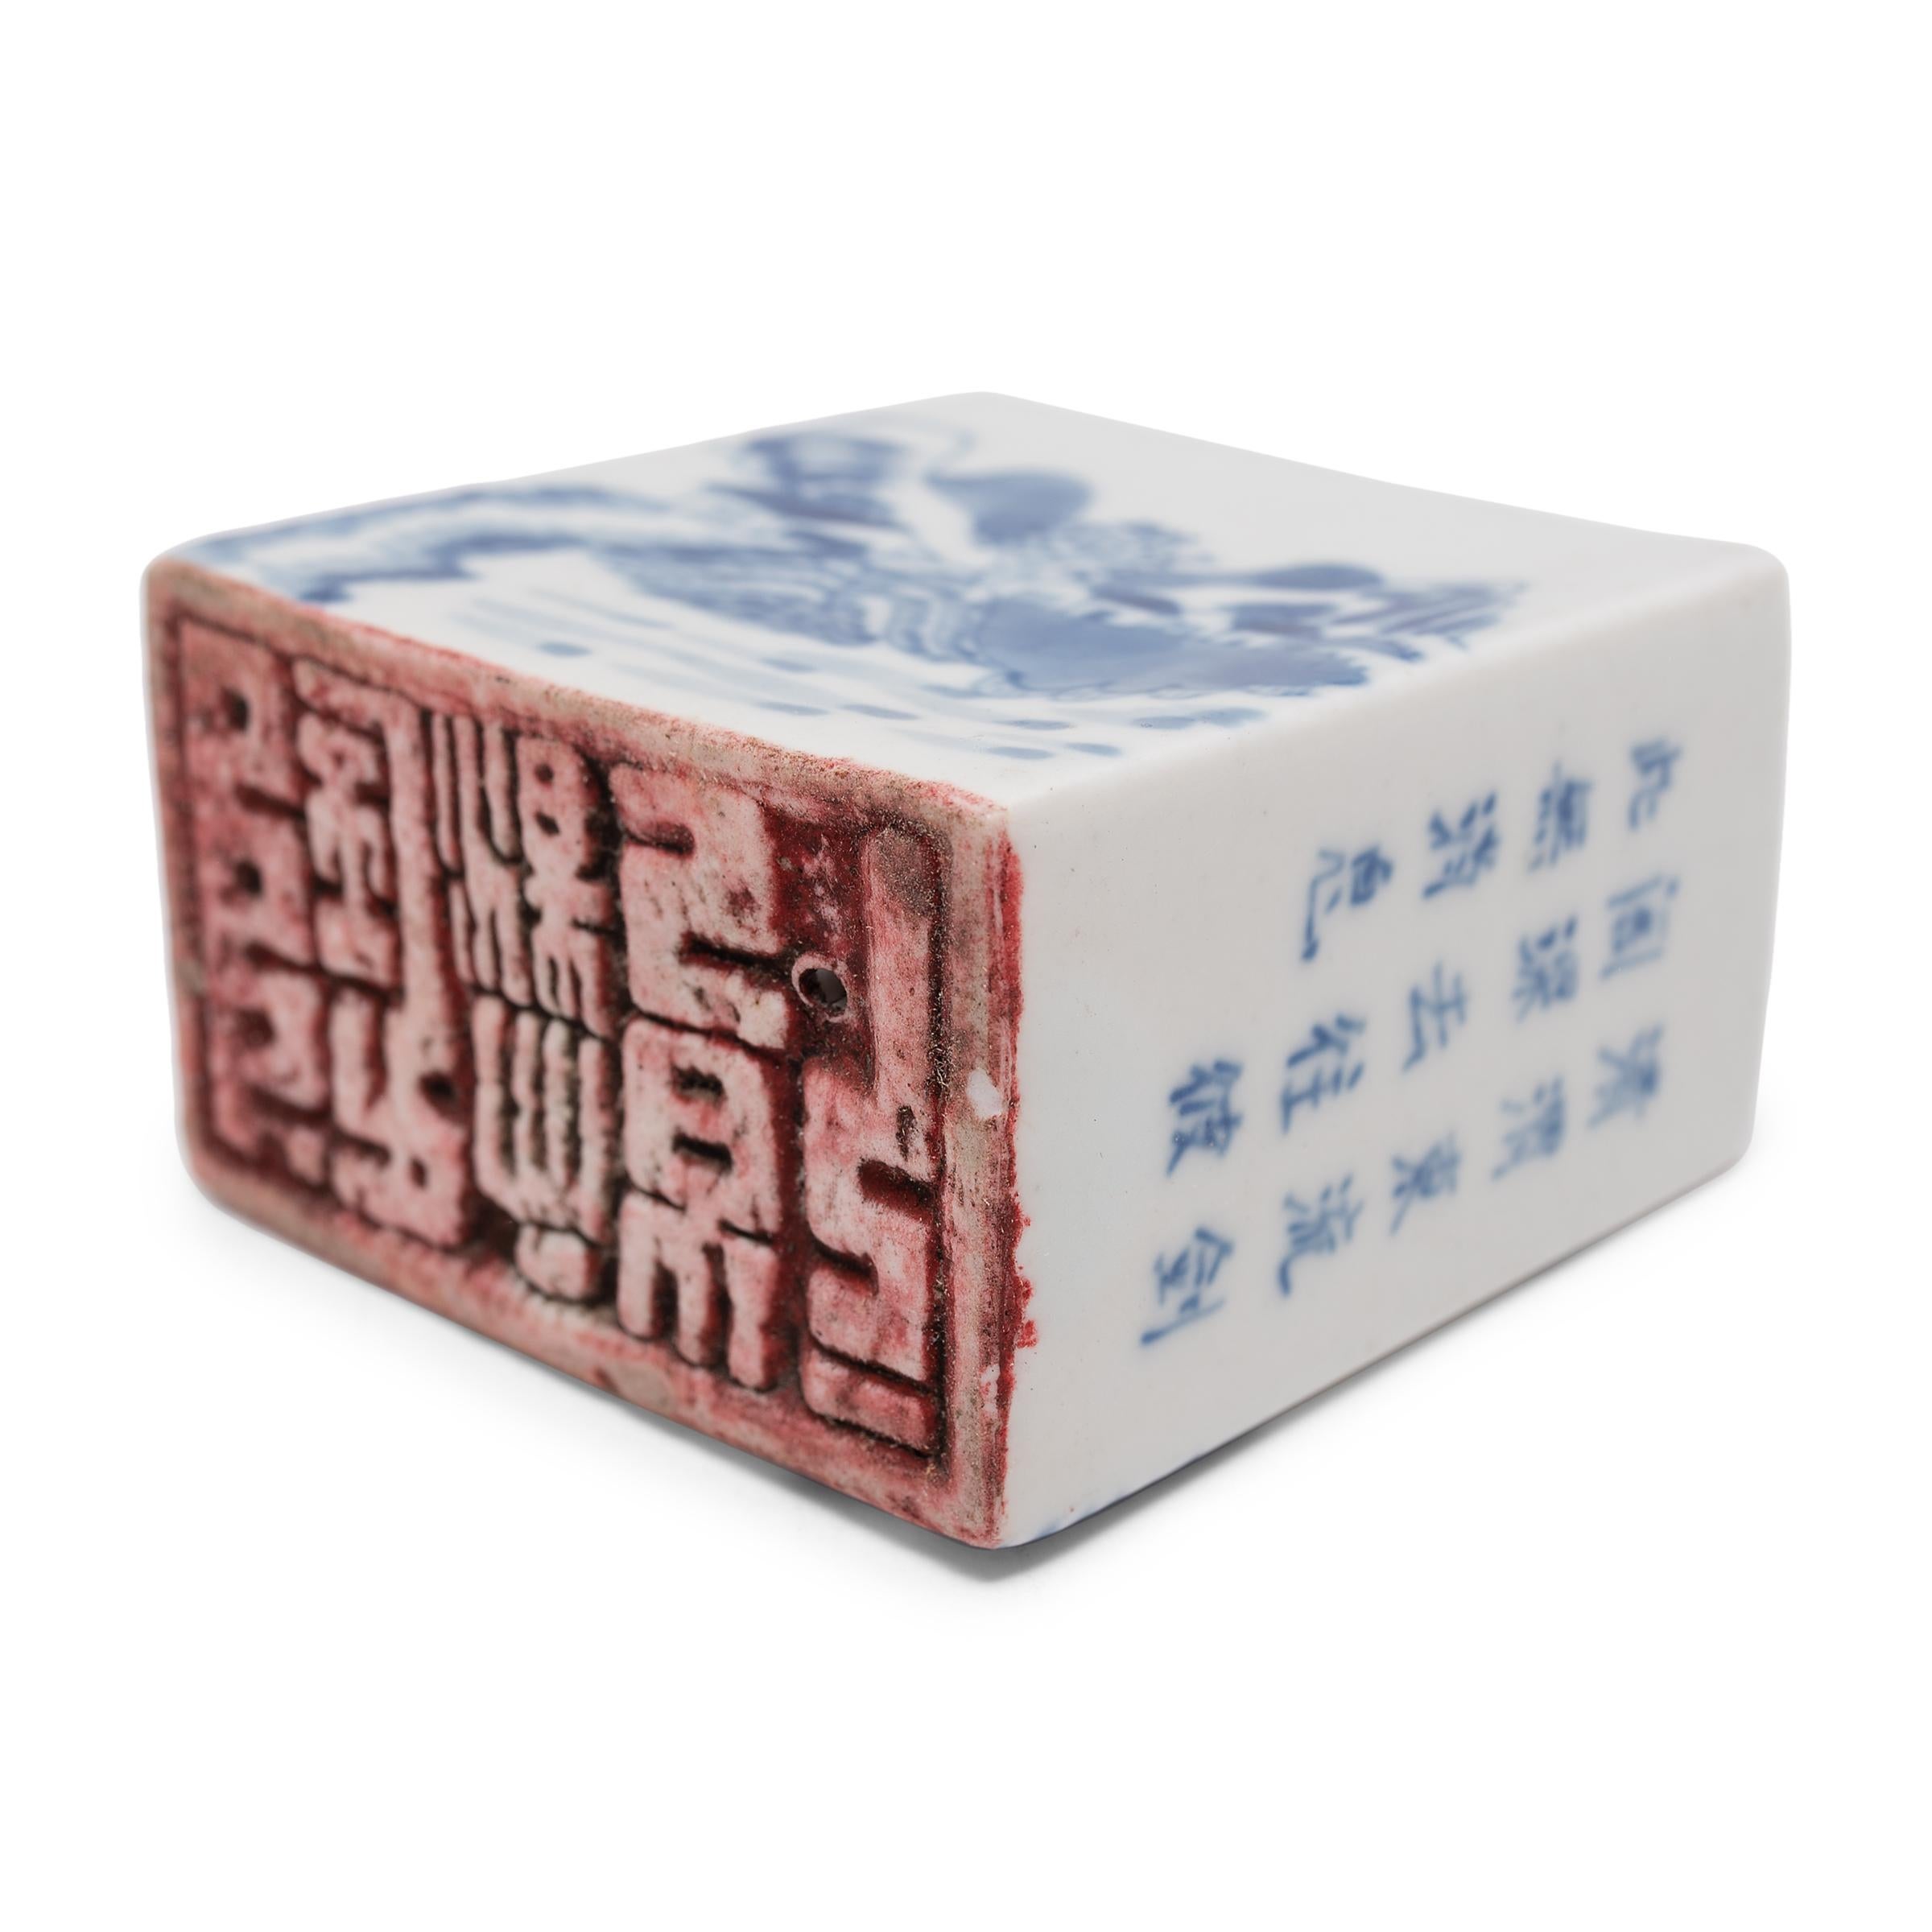 Glazed Chinese Blue and White Porcelain Seal